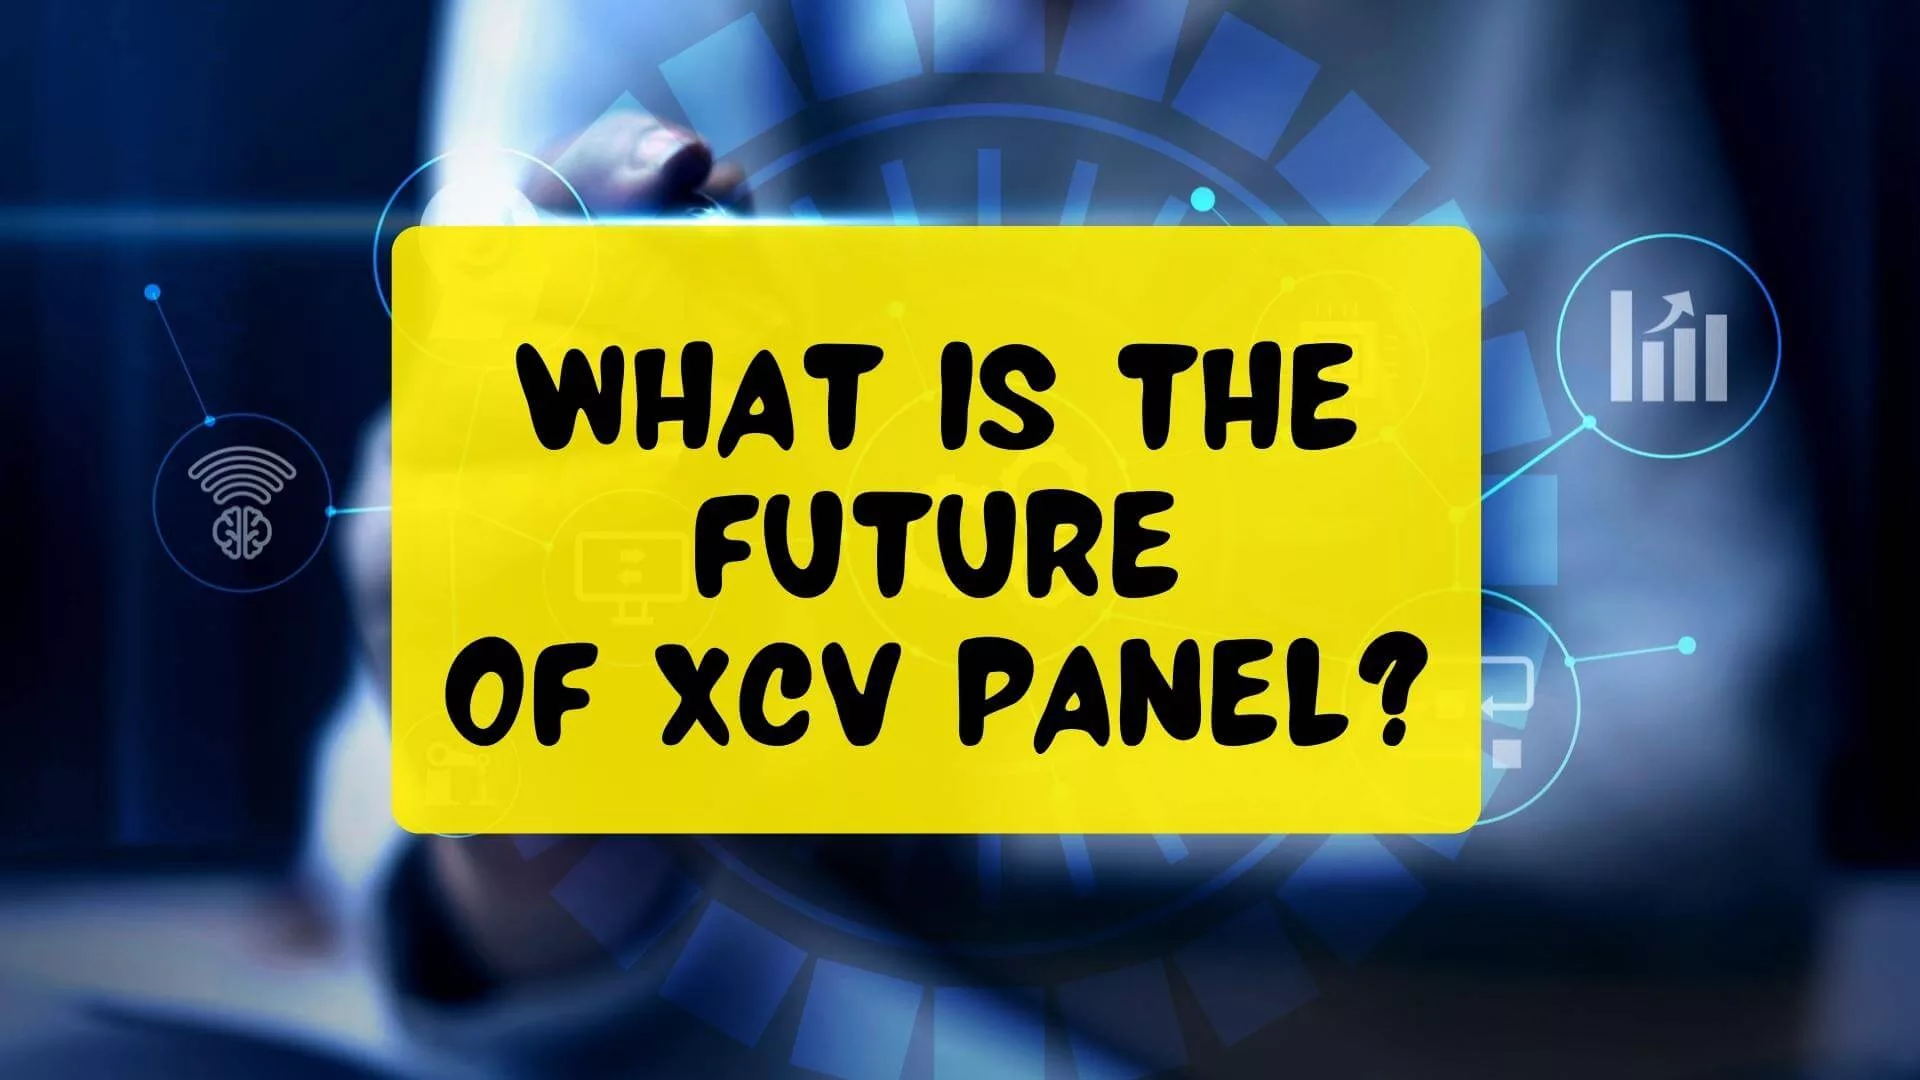 What is the Future of XCV Panel?